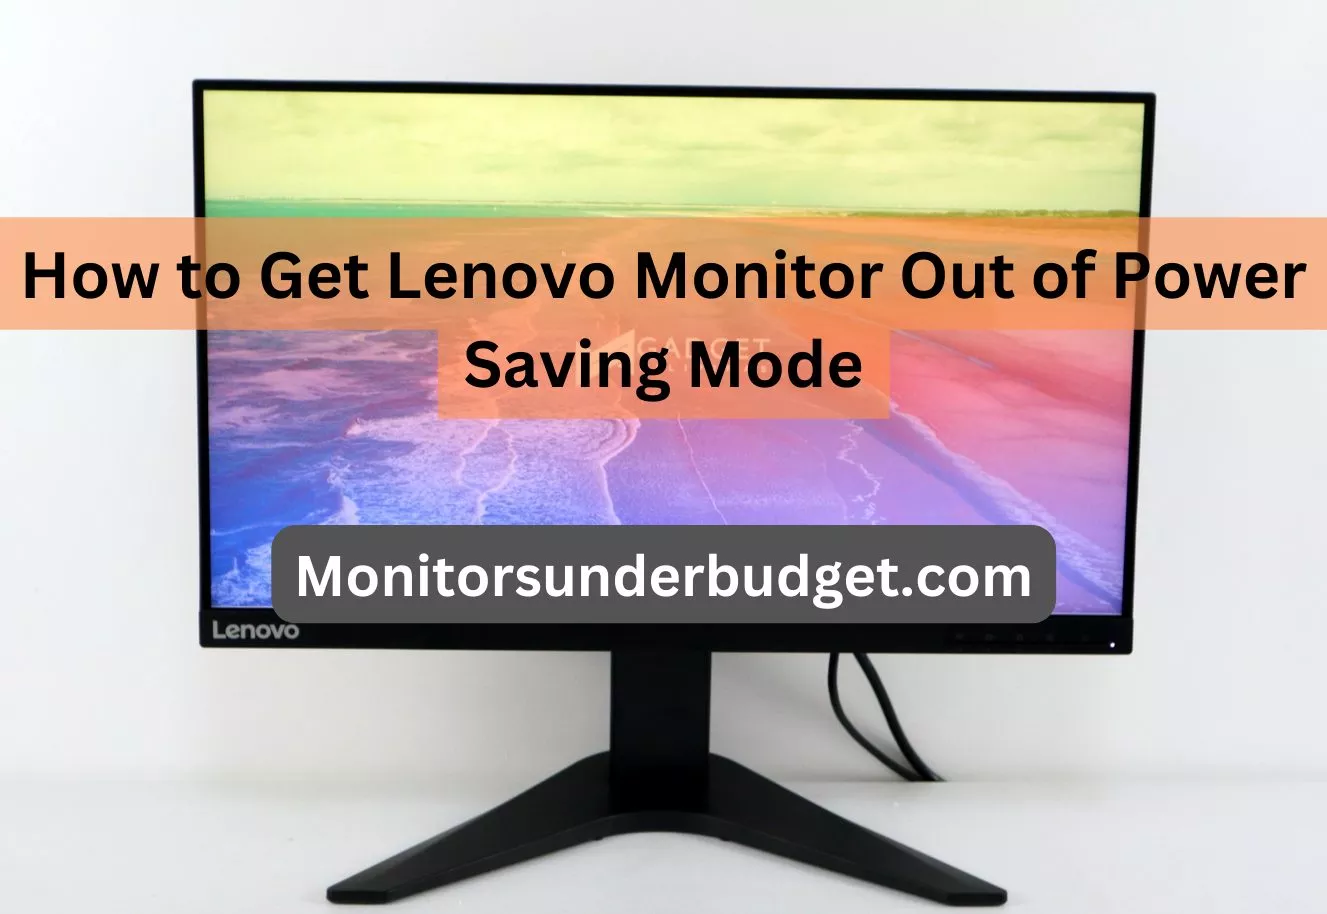 How to Get Lenovo Monitor Out of Power Saving Mode